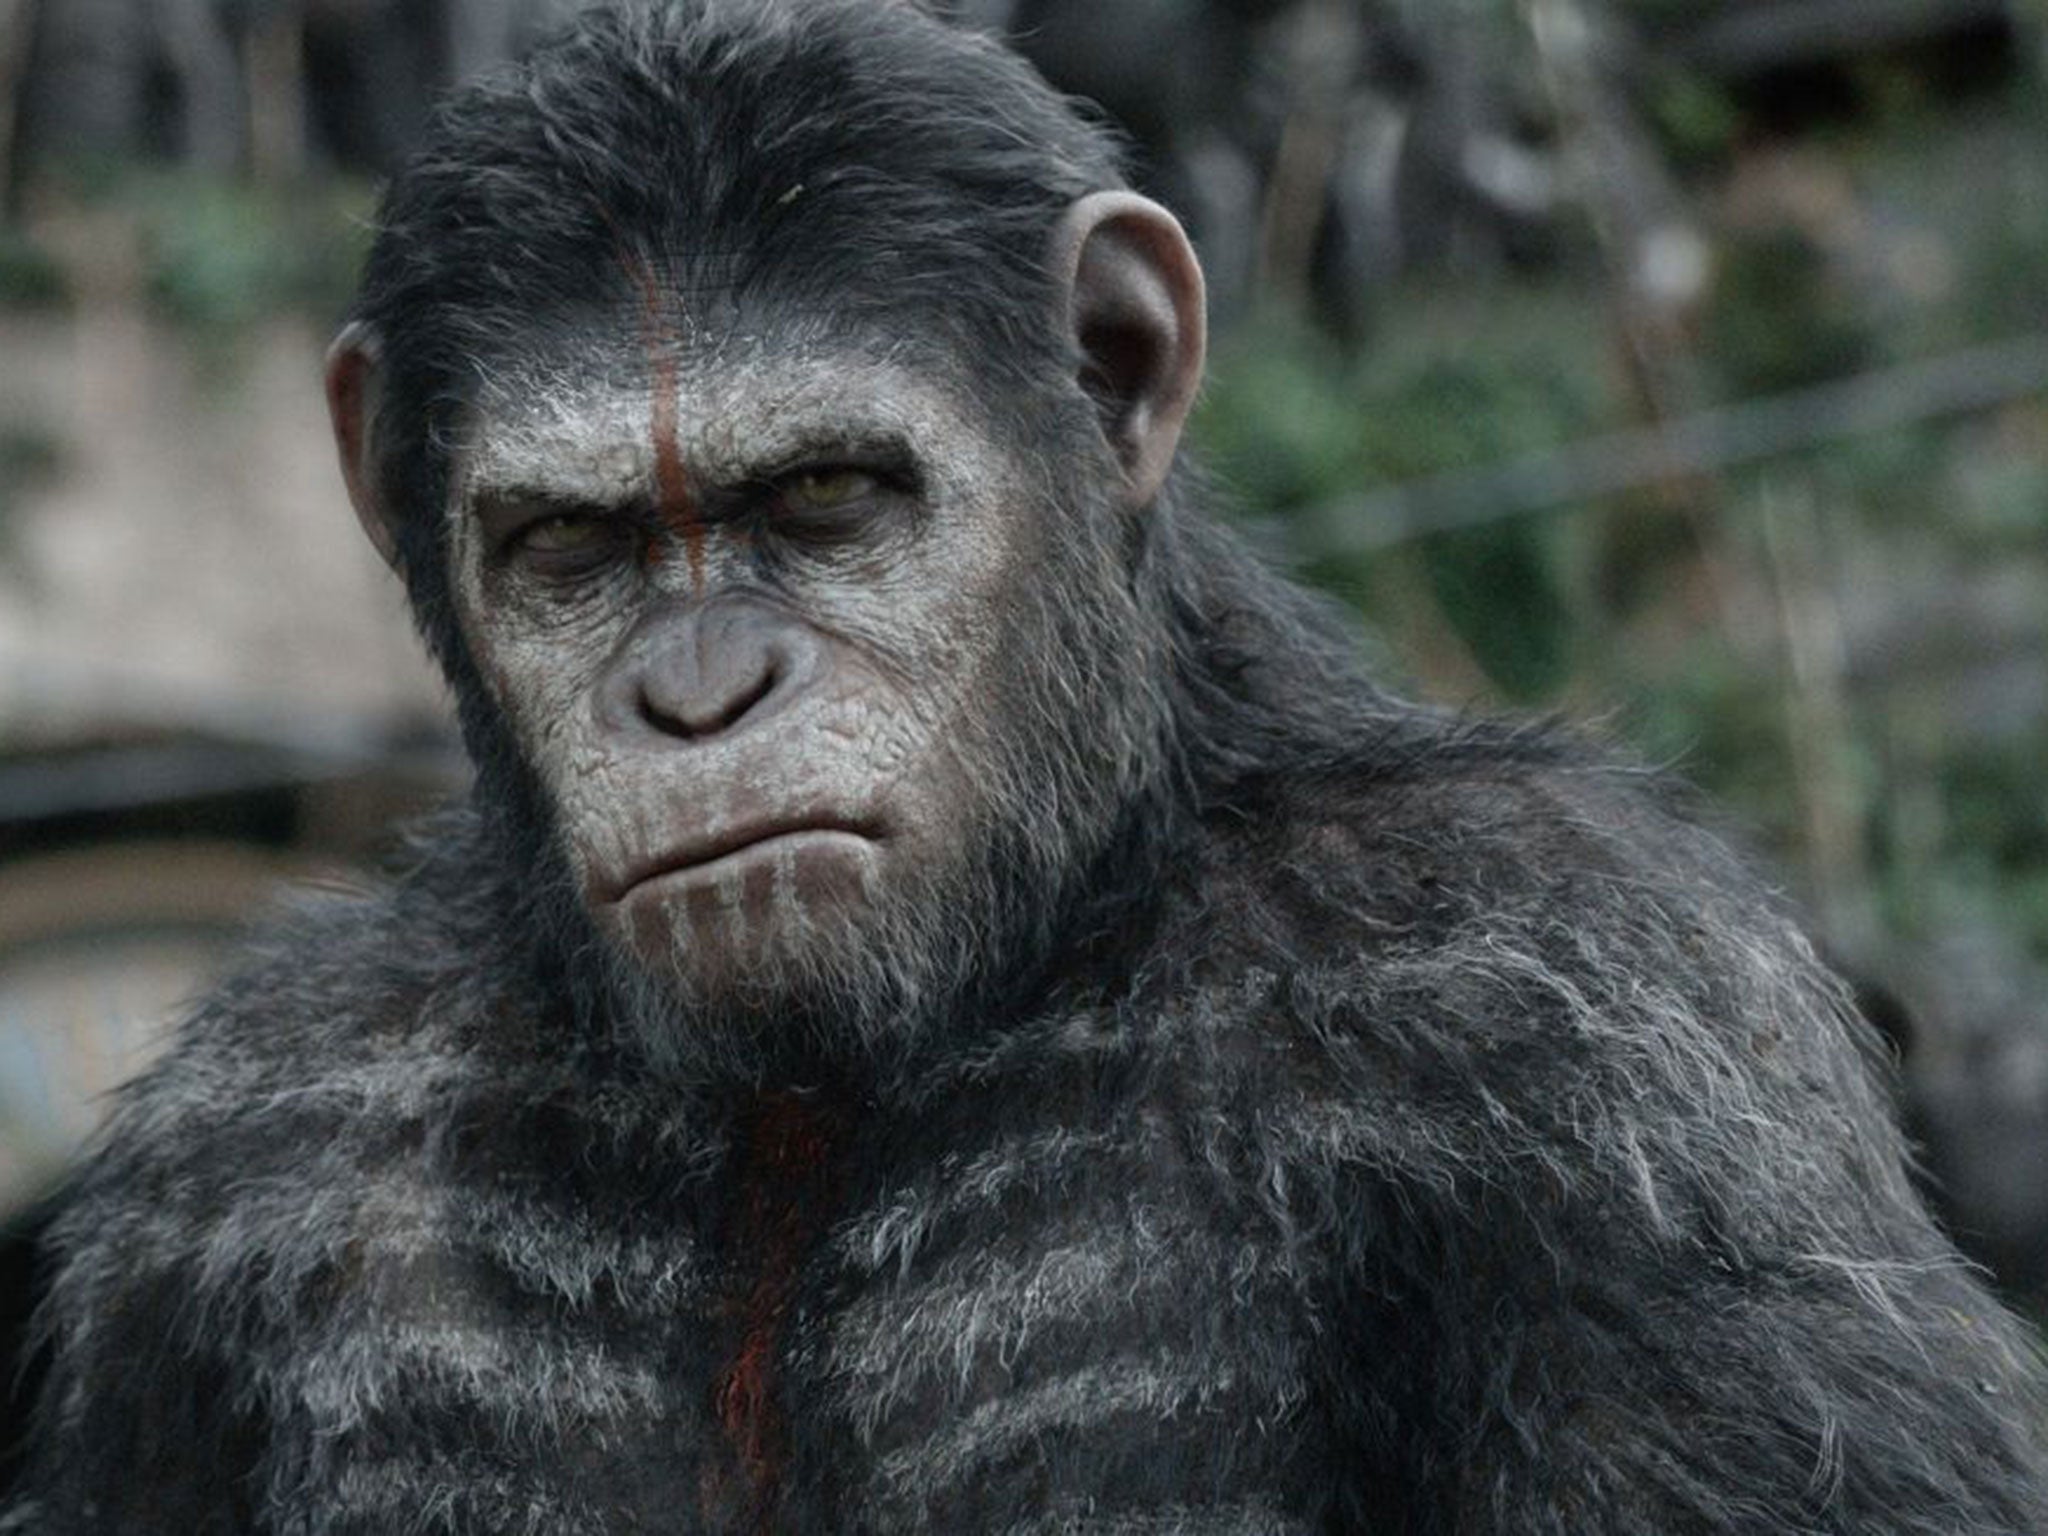 Andy Serkis as leader of the apes Caesar